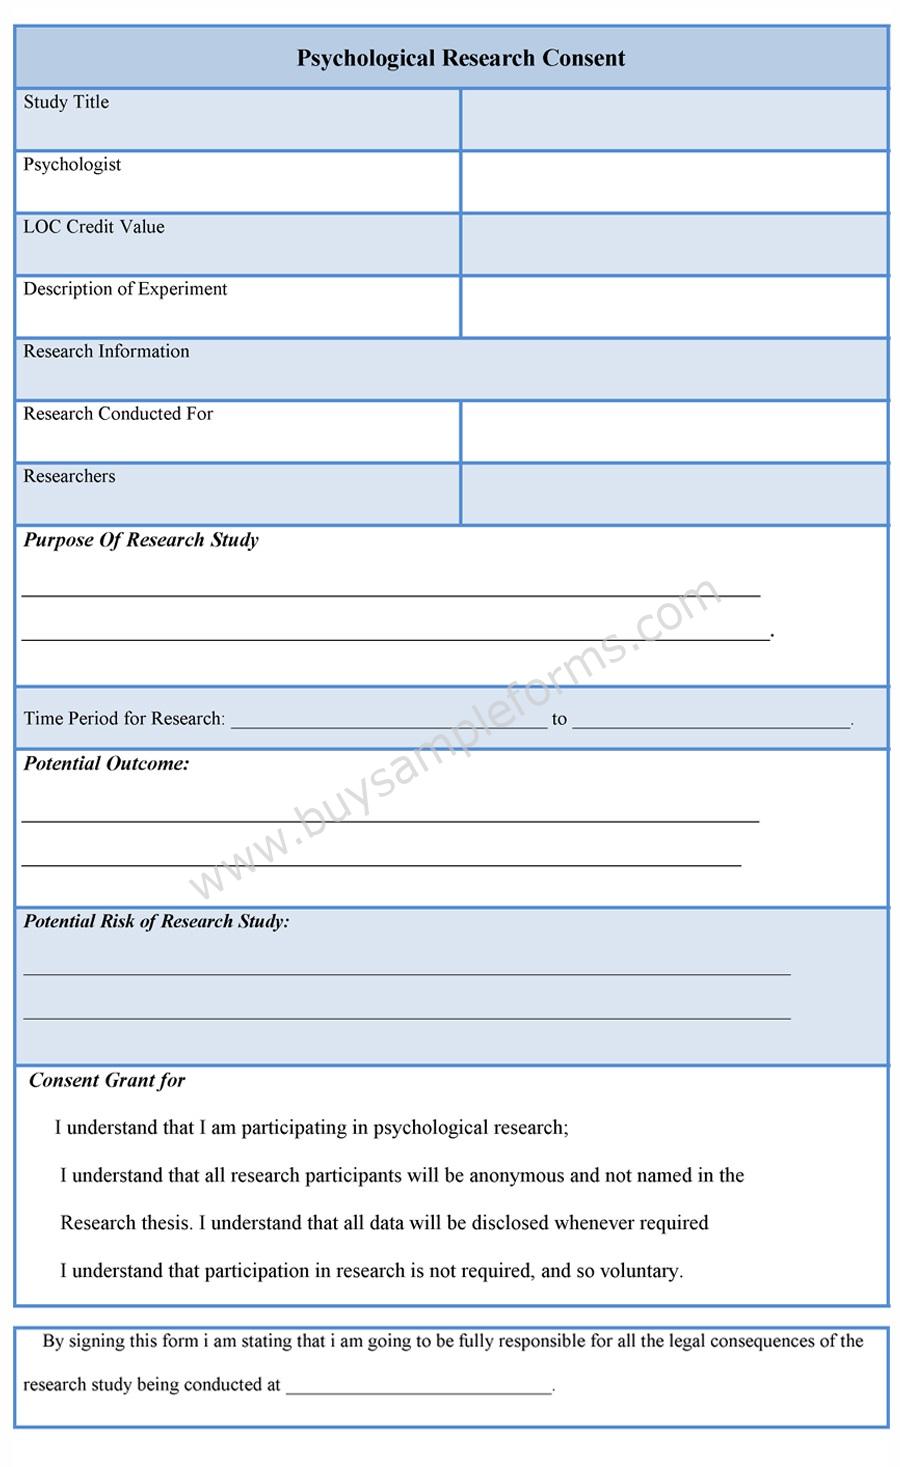 psychology research consent form template